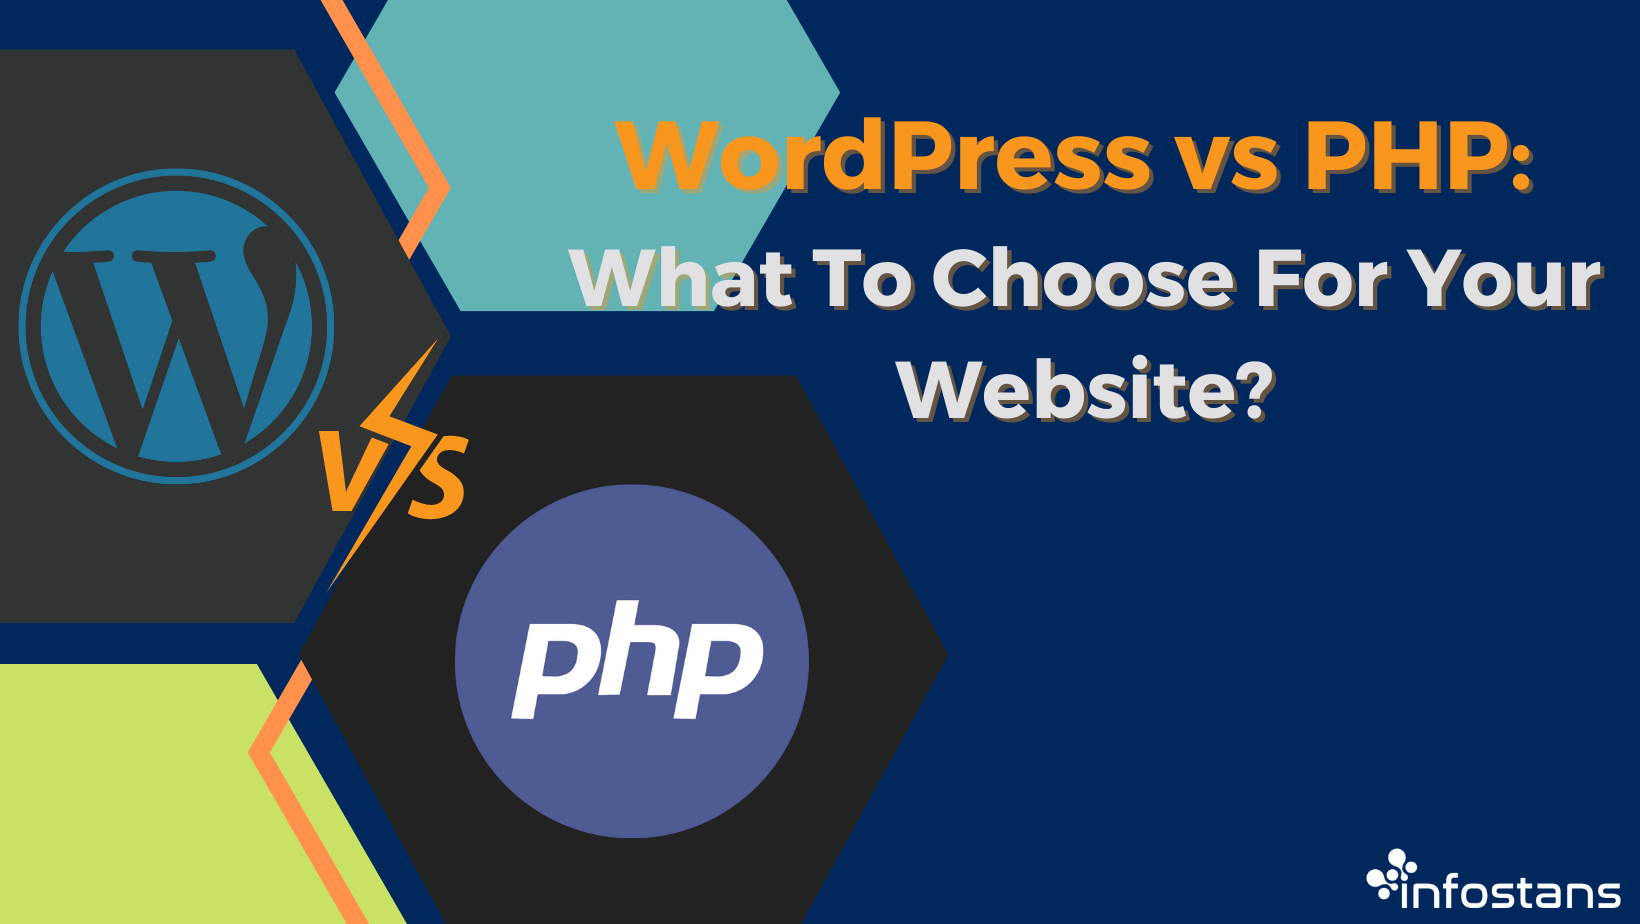 WordPress vs PHP: What To Choose For Your Web Development?